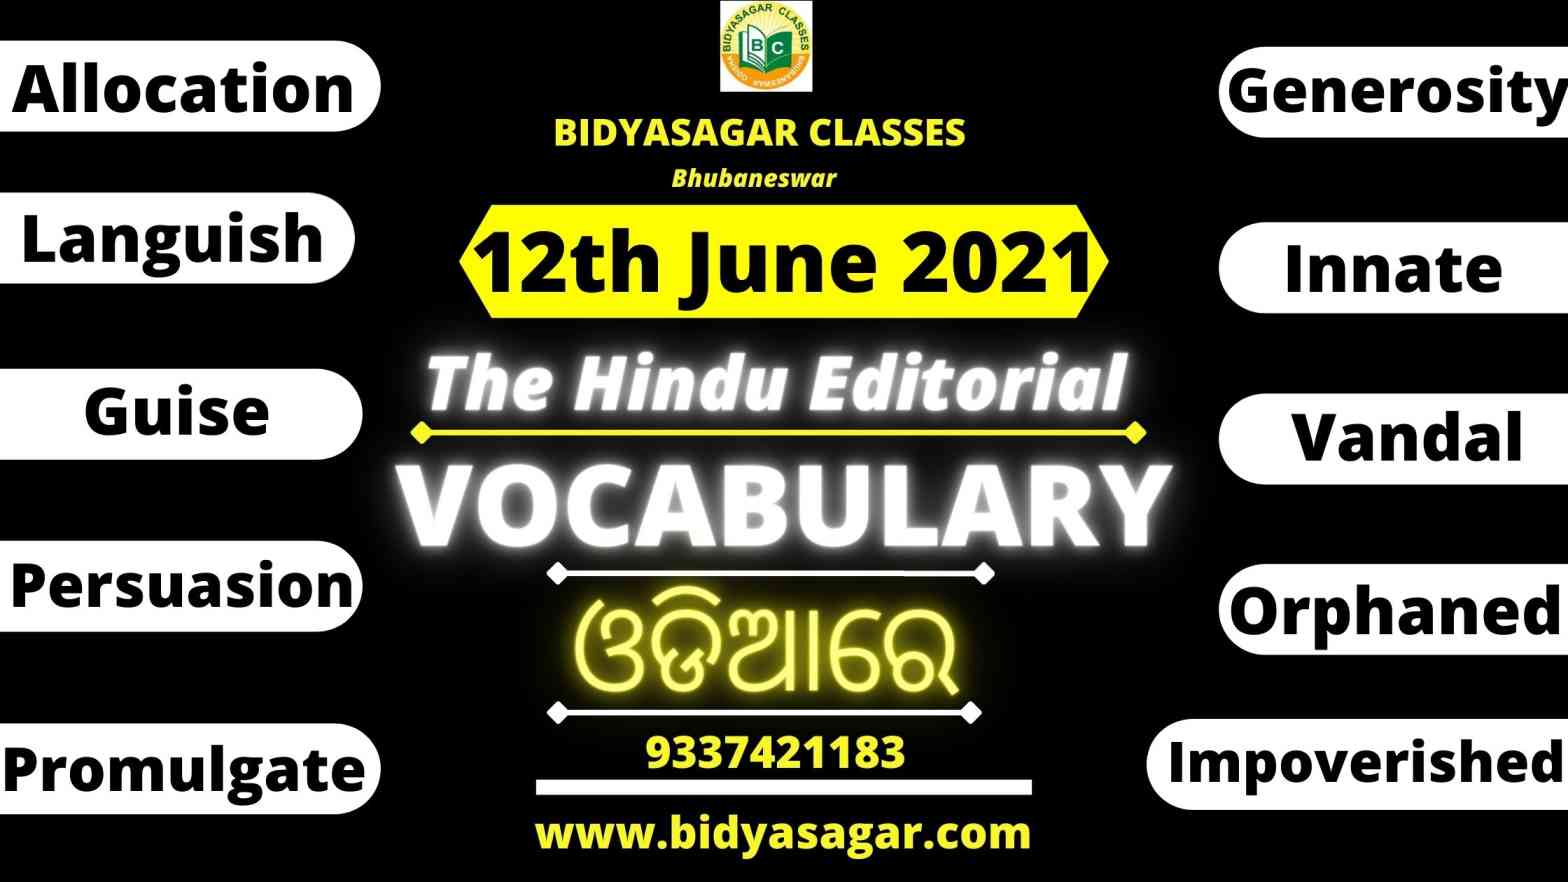 The Hindu Editorial Vocabulary of 12th June 2021